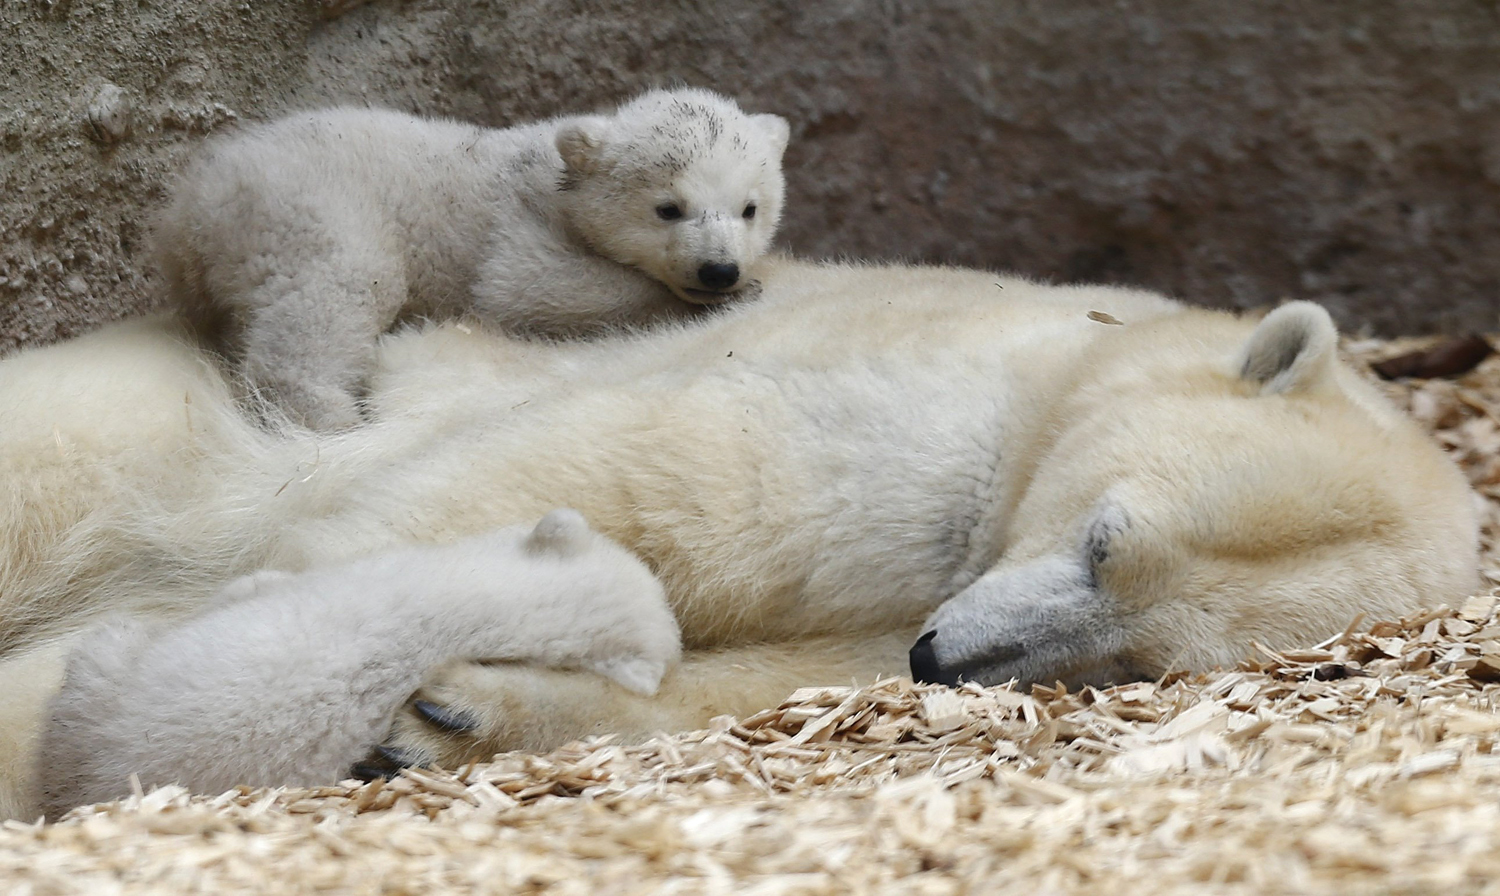 Twin polar bear cubs, who have yet to be named, lie on their mother Giovanna outside in their enclosure during their first public appearance.